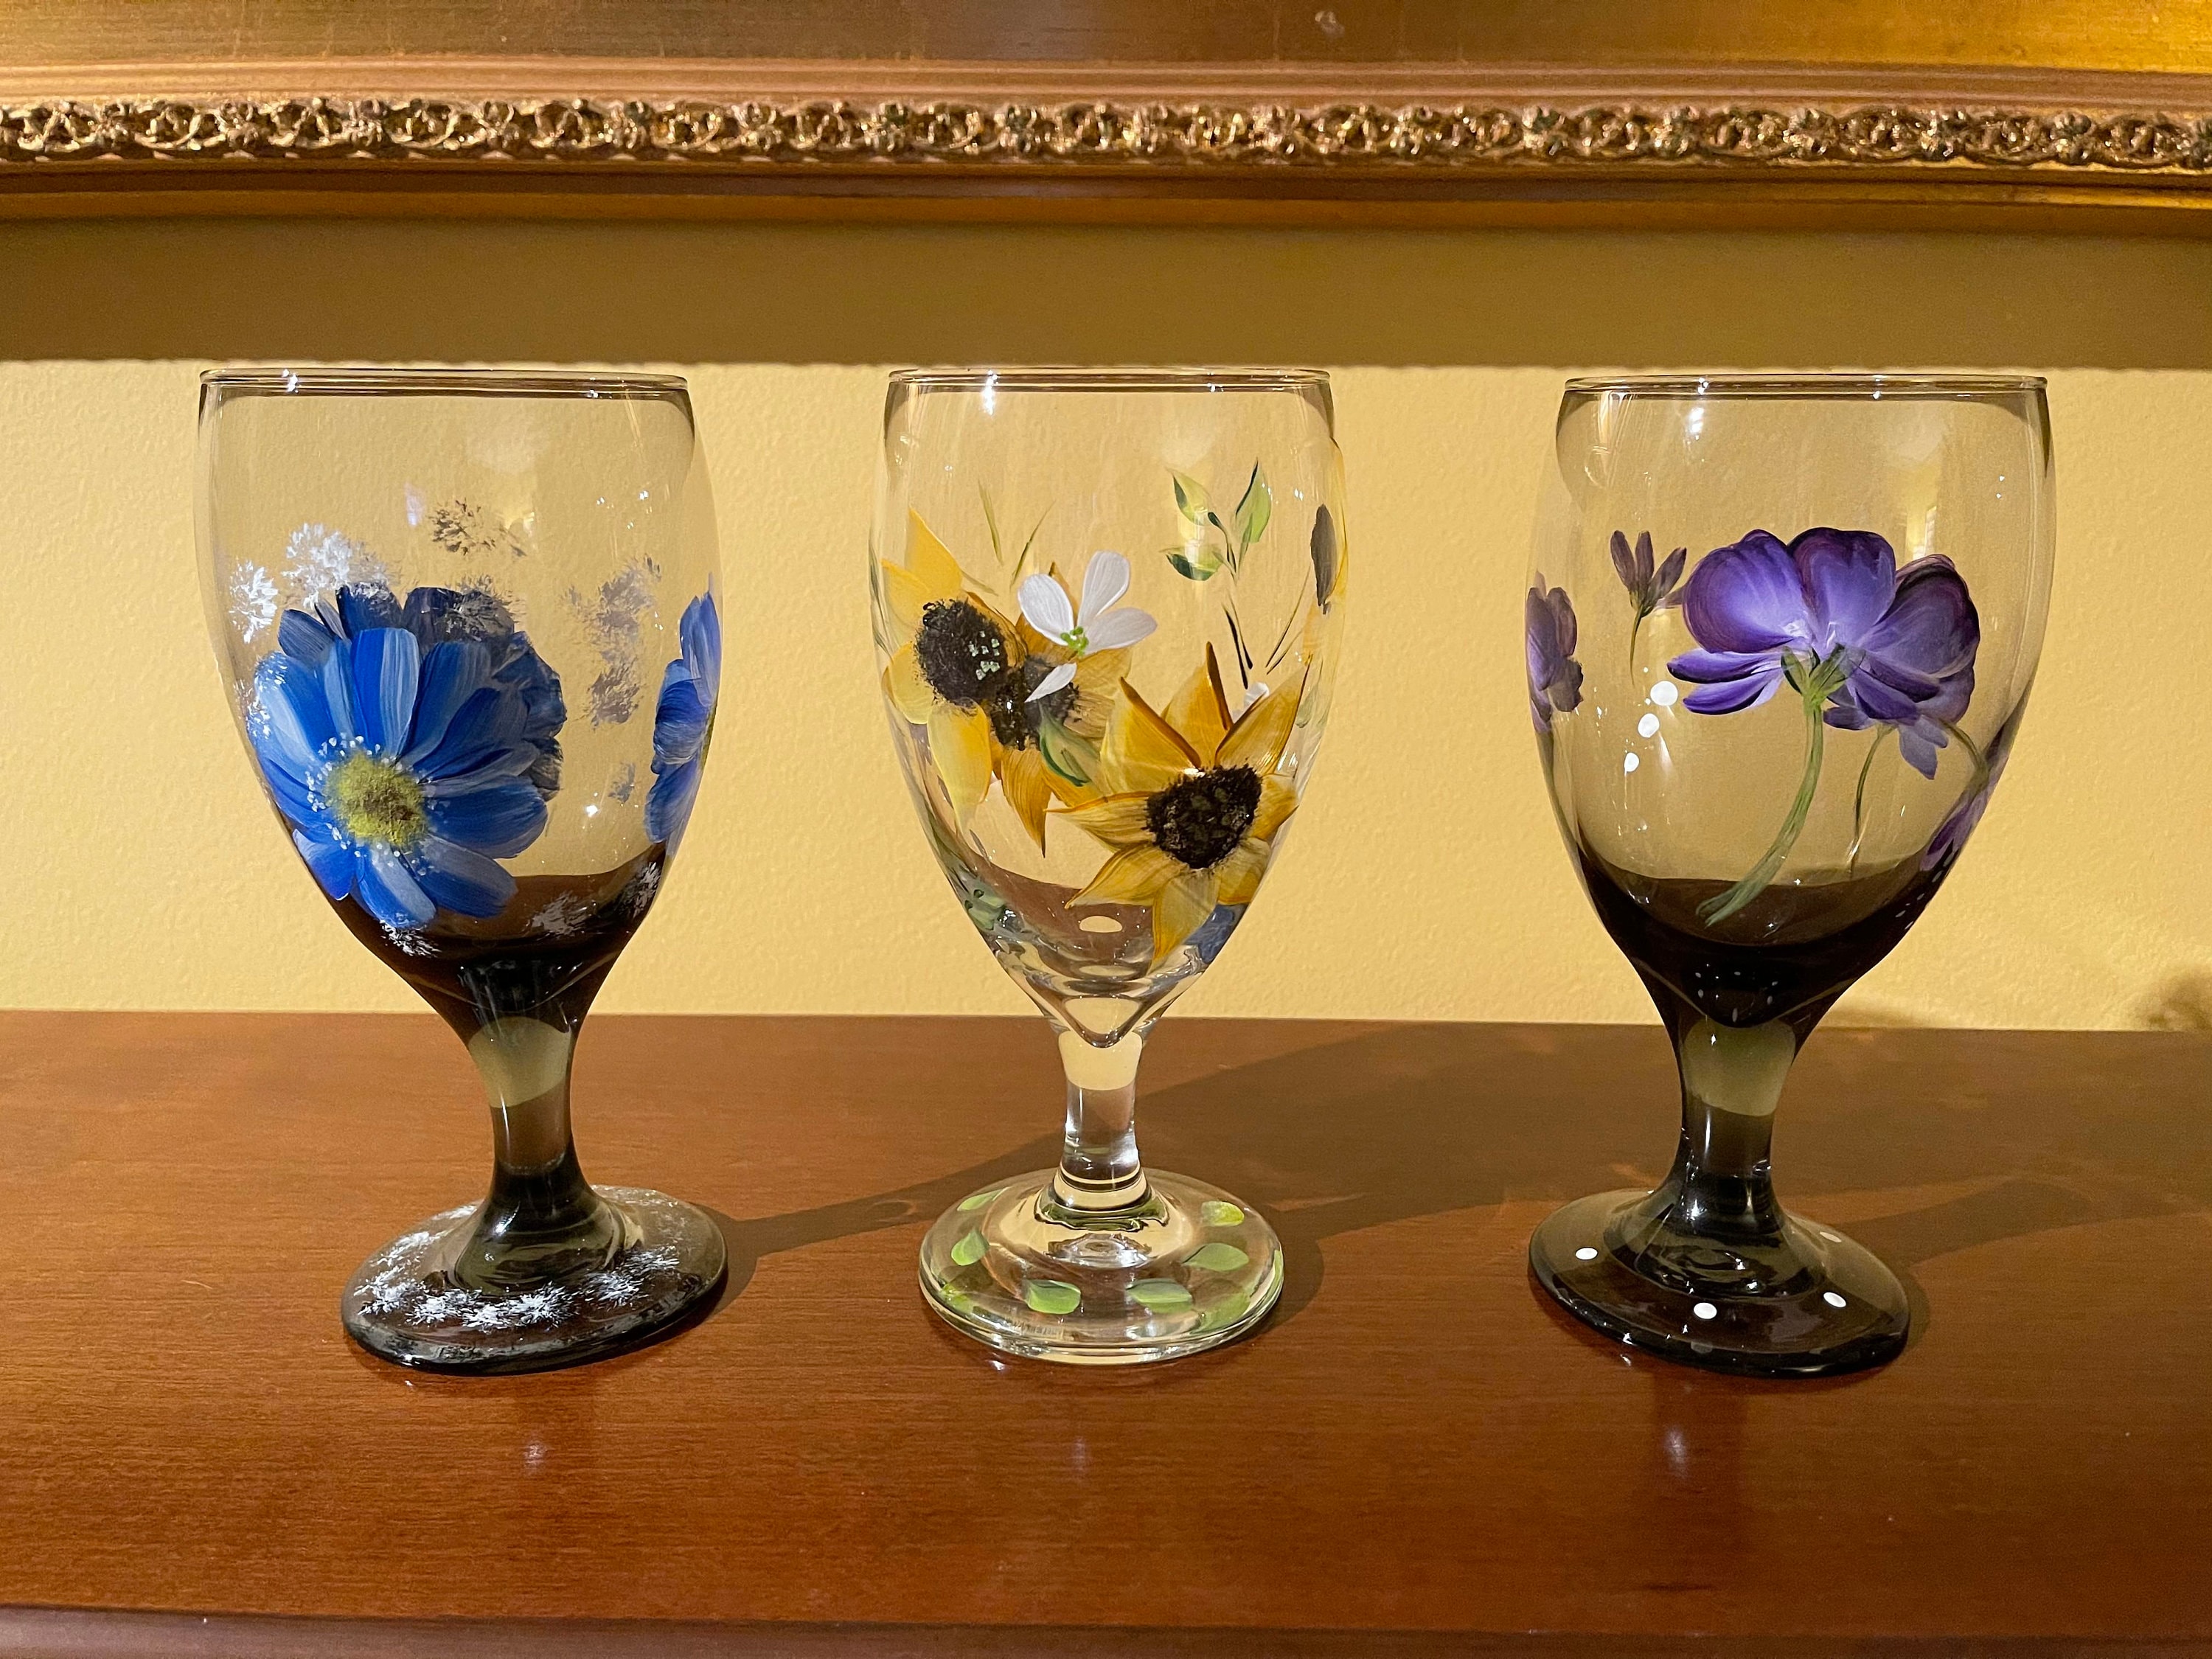 Gourd Hand-painted Wine Glasses – Glorious Goblets